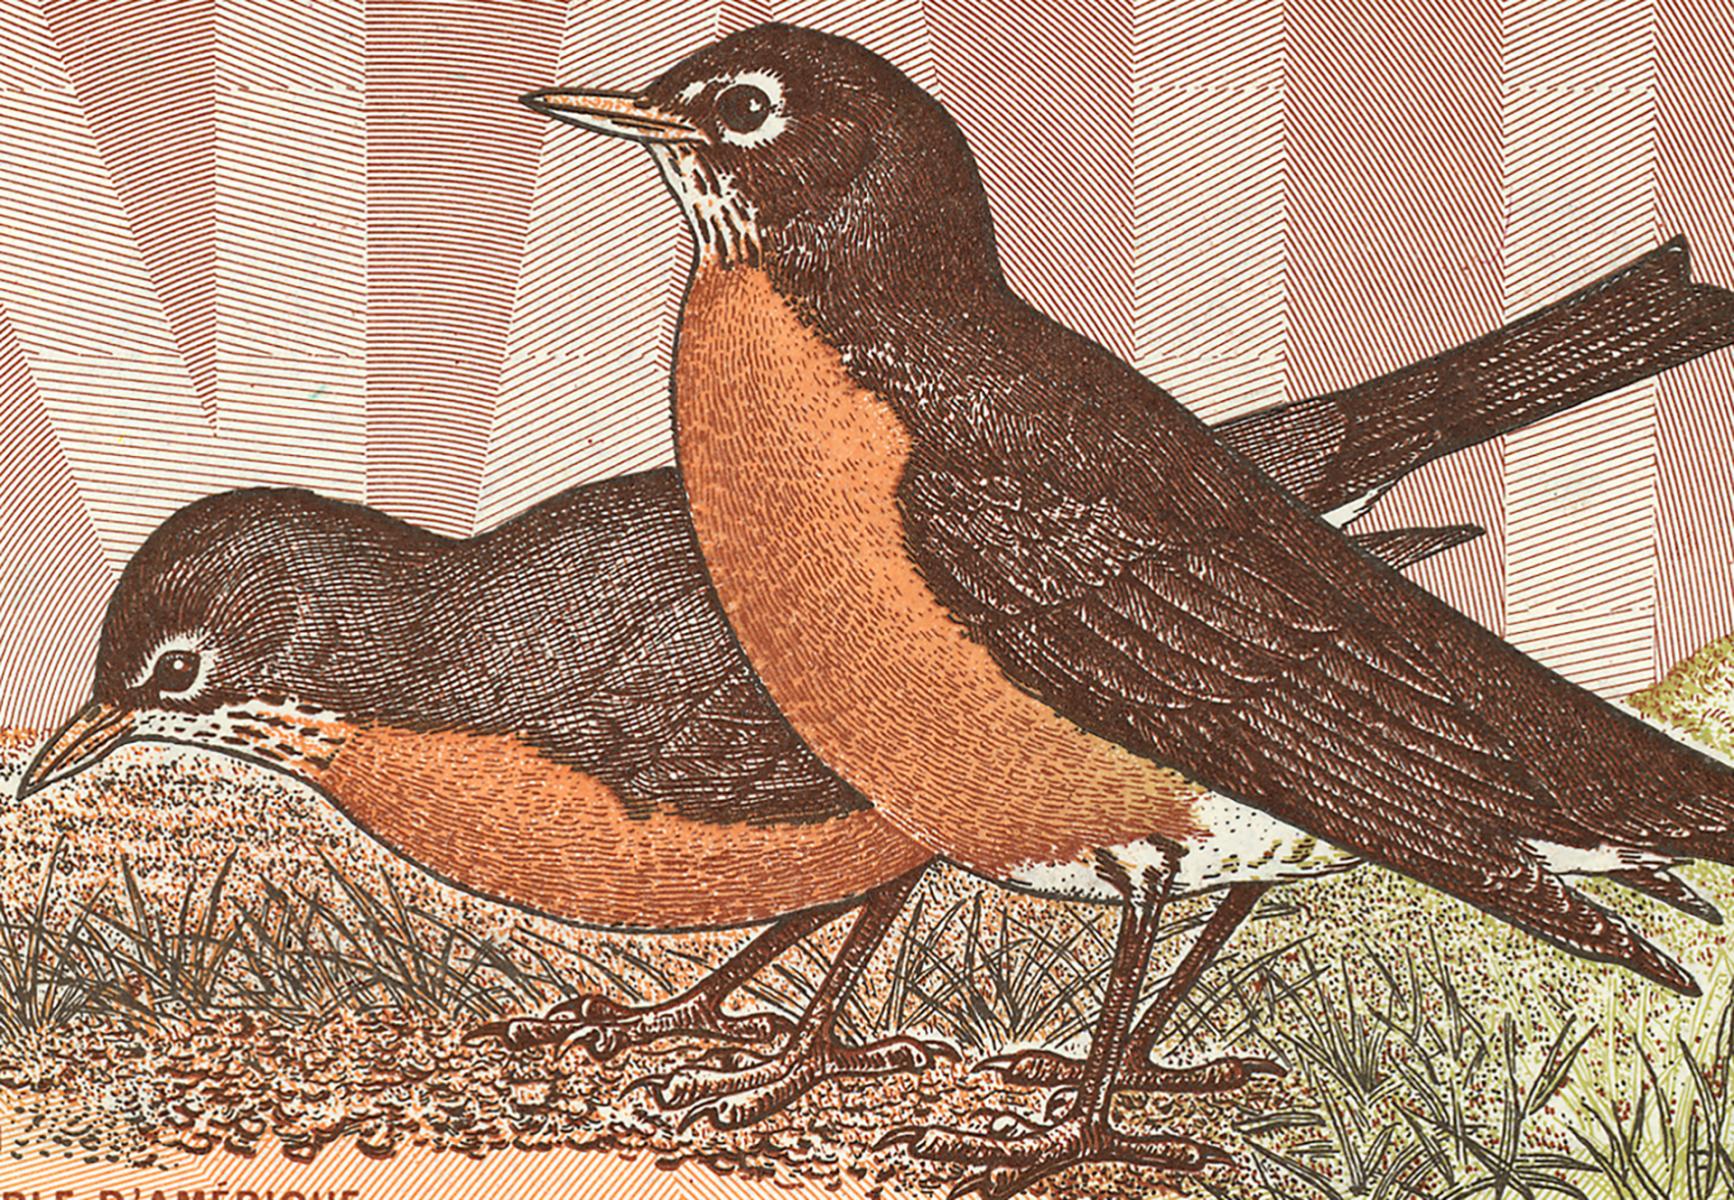 Bank note illustration, 2 birds with red breasts and grey backs standing in a grassy landscape.